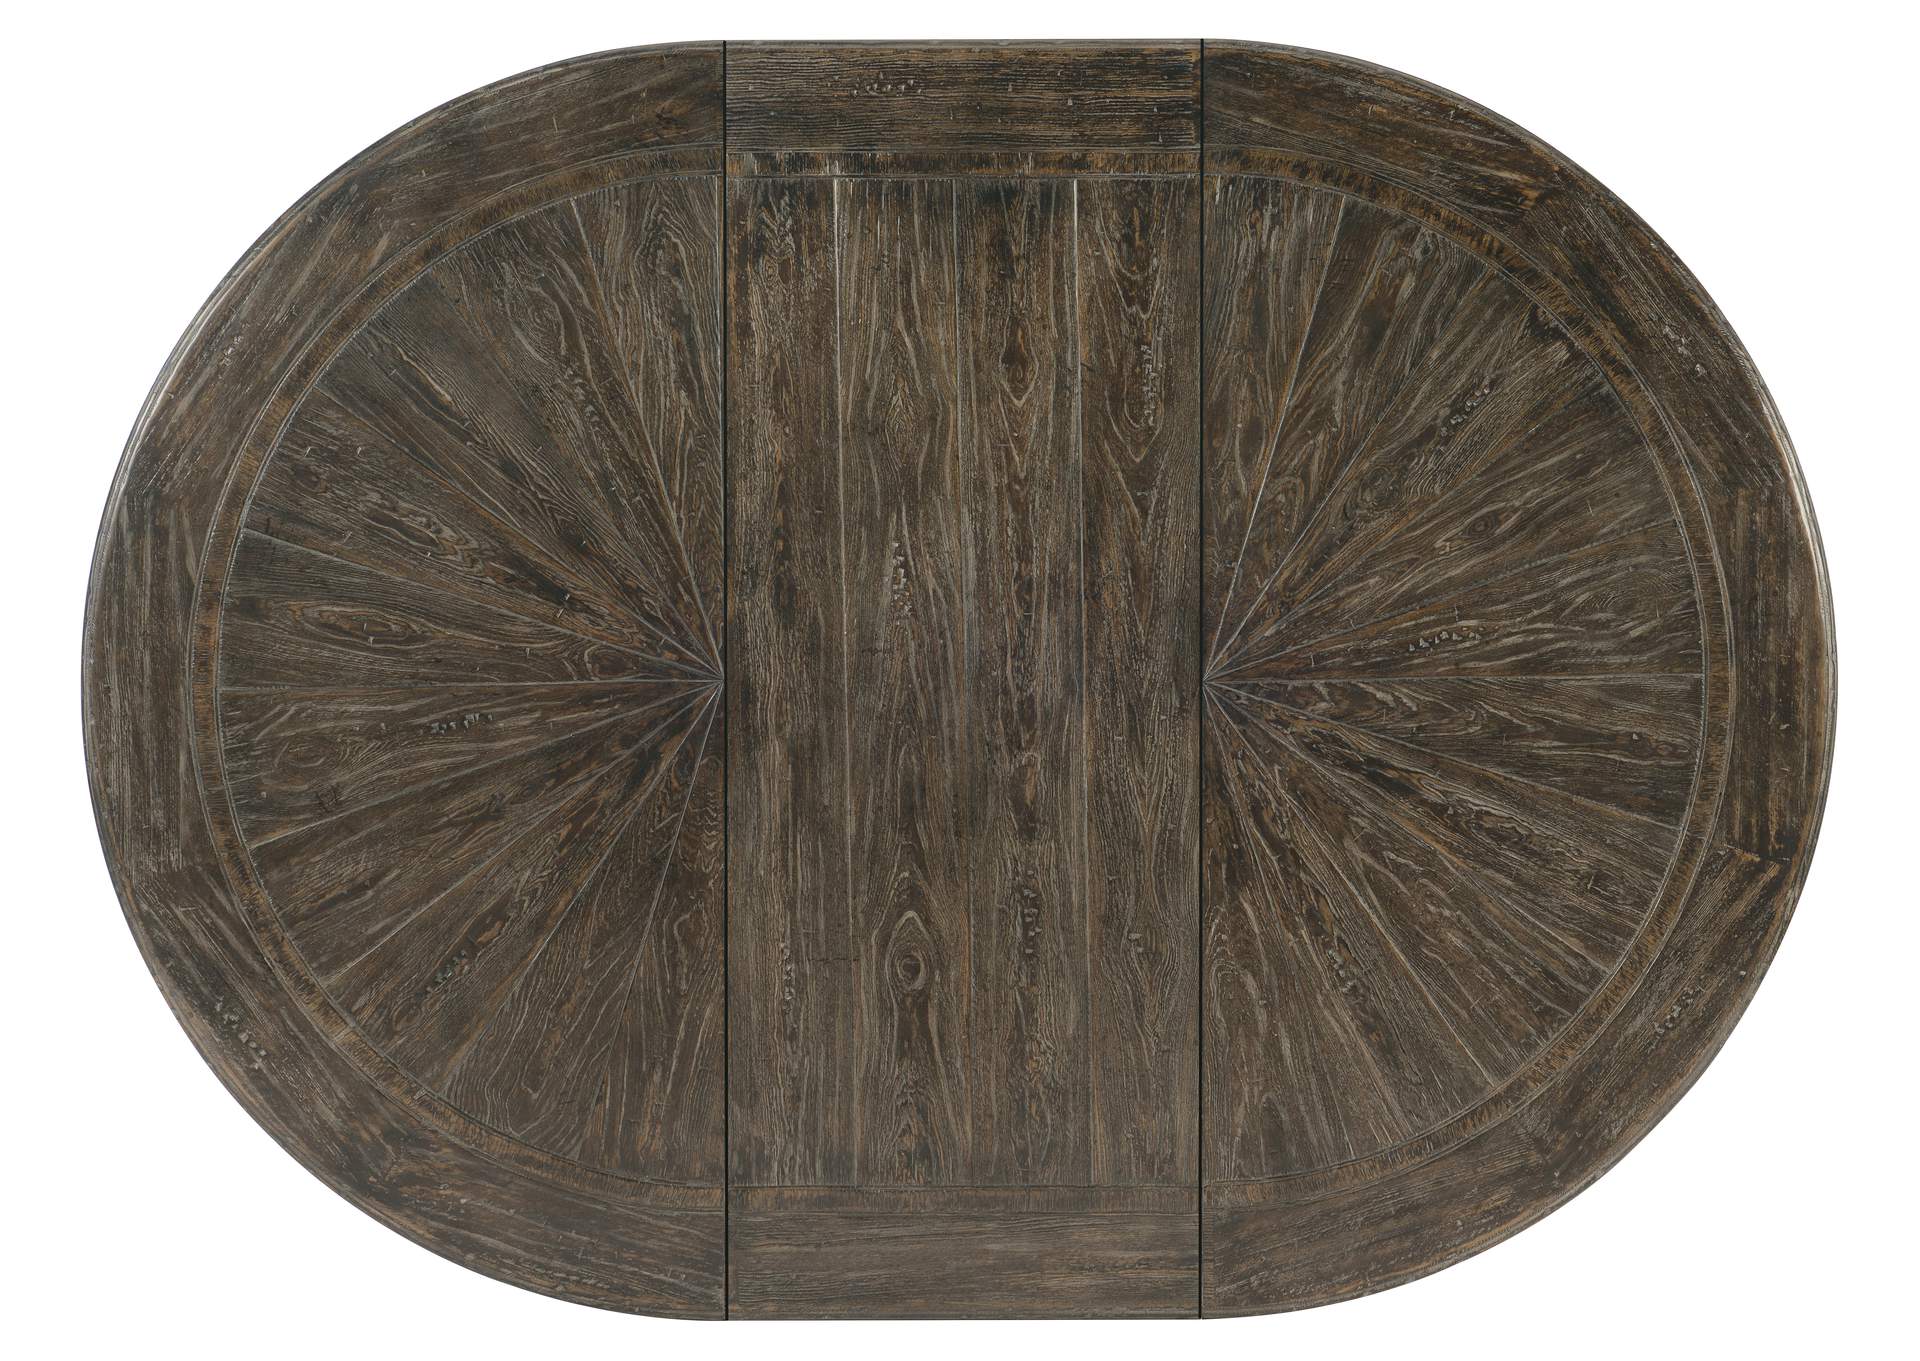 Traditions 54In Round Dining Table With One 20 - Inch Leaf,Hooker Furniture